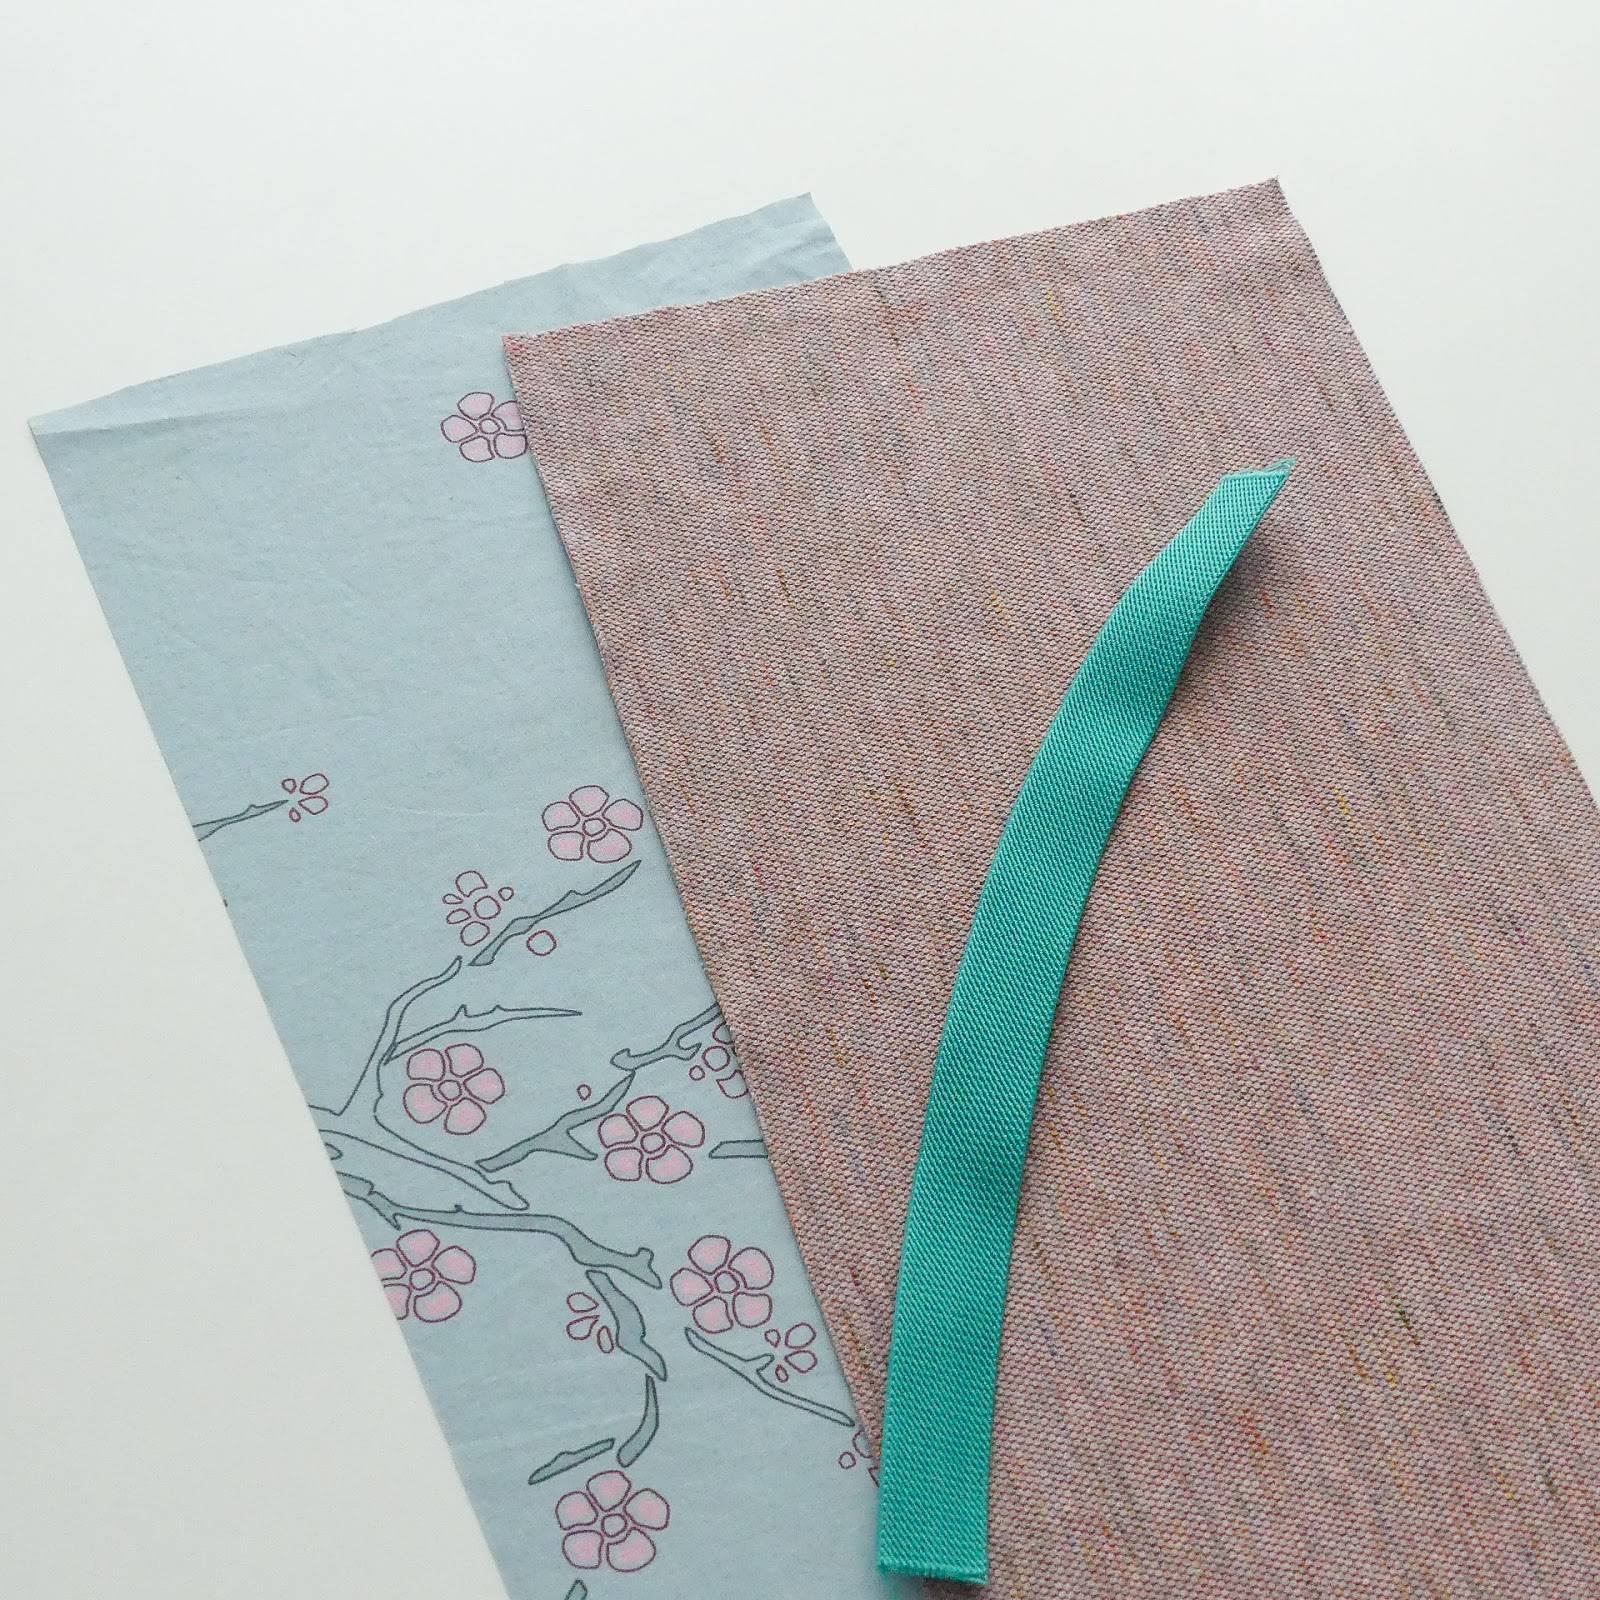 2 pieces of fabric and an elastic to make a kneeler